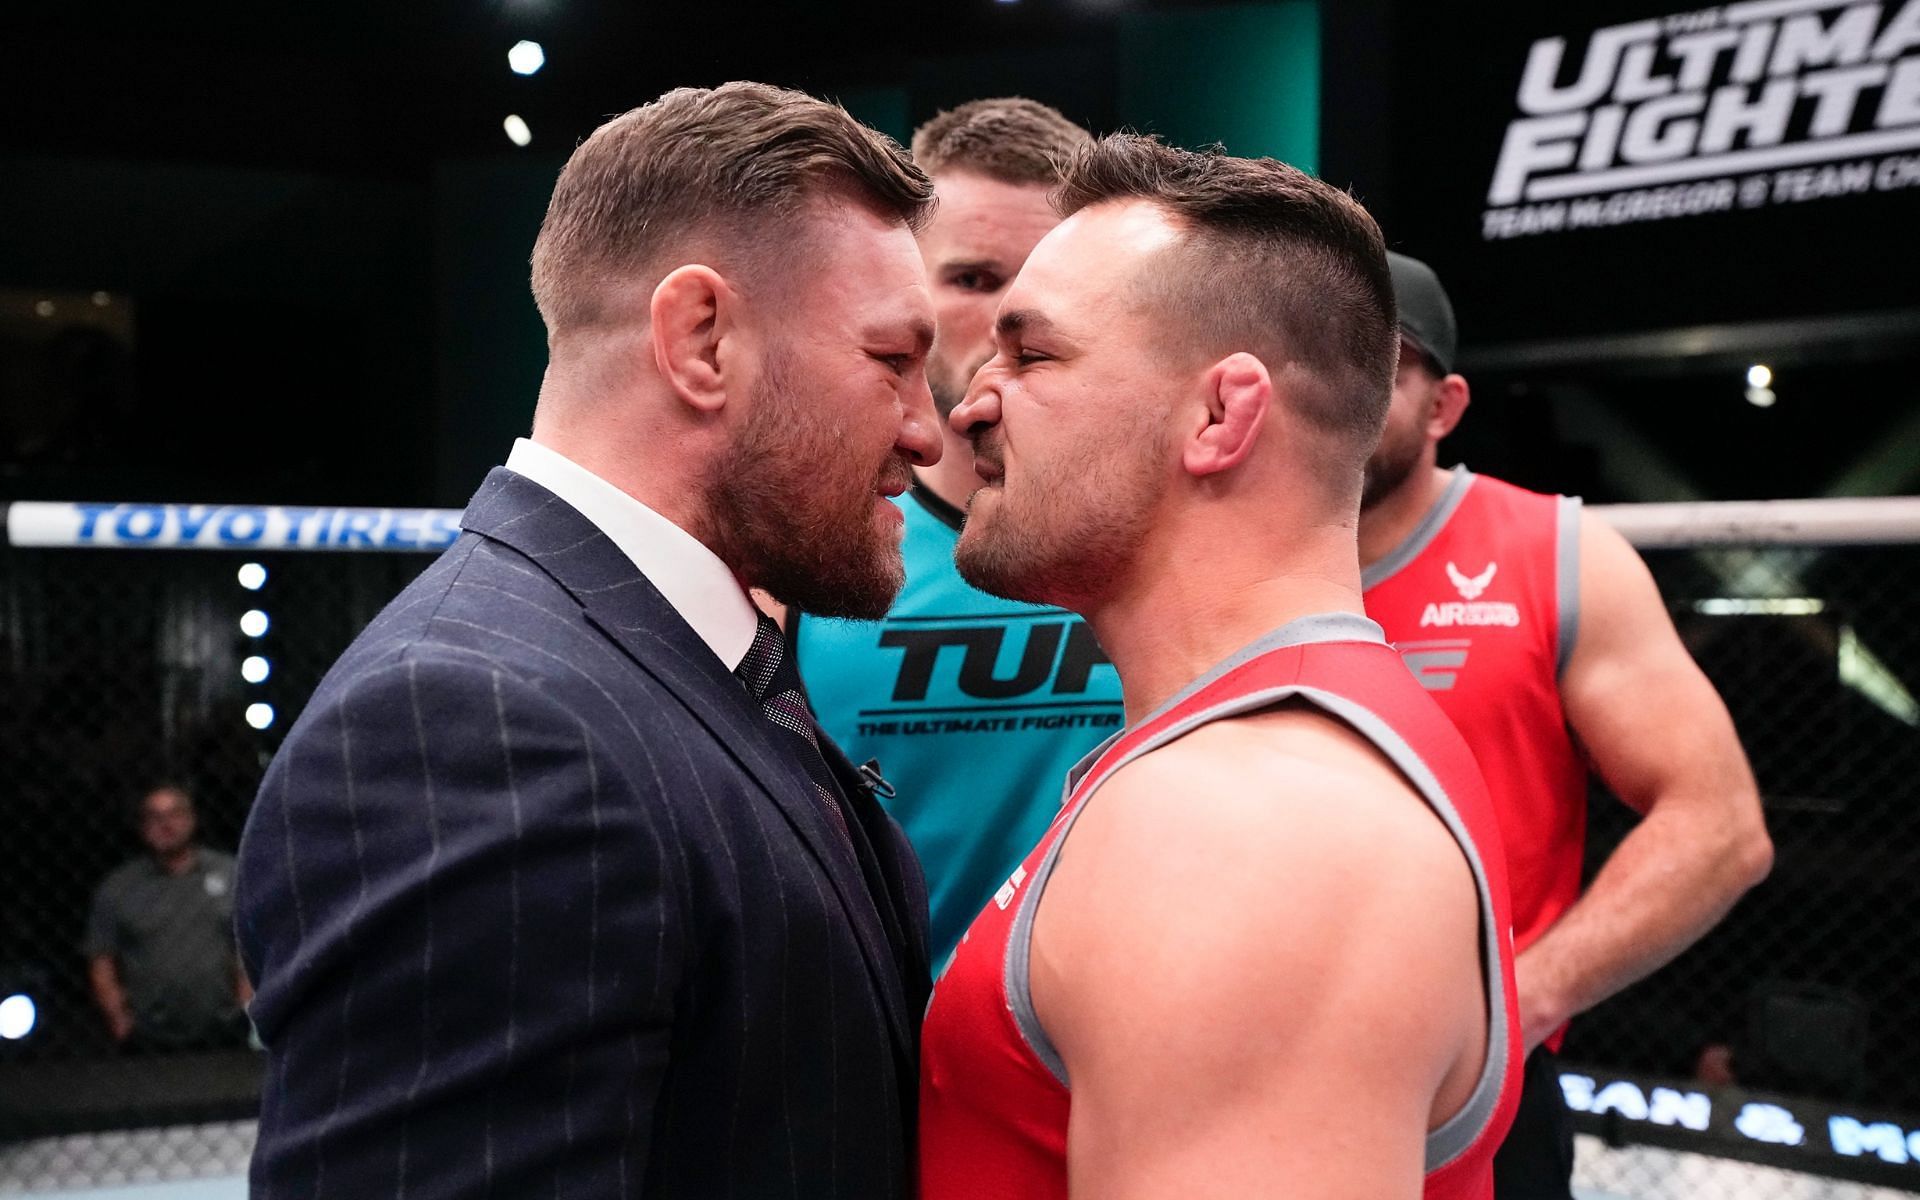 Will fans ever get to see Conor McGregor face Michael Chandler? [Image Credit: @UltimateFighter on Twitter]